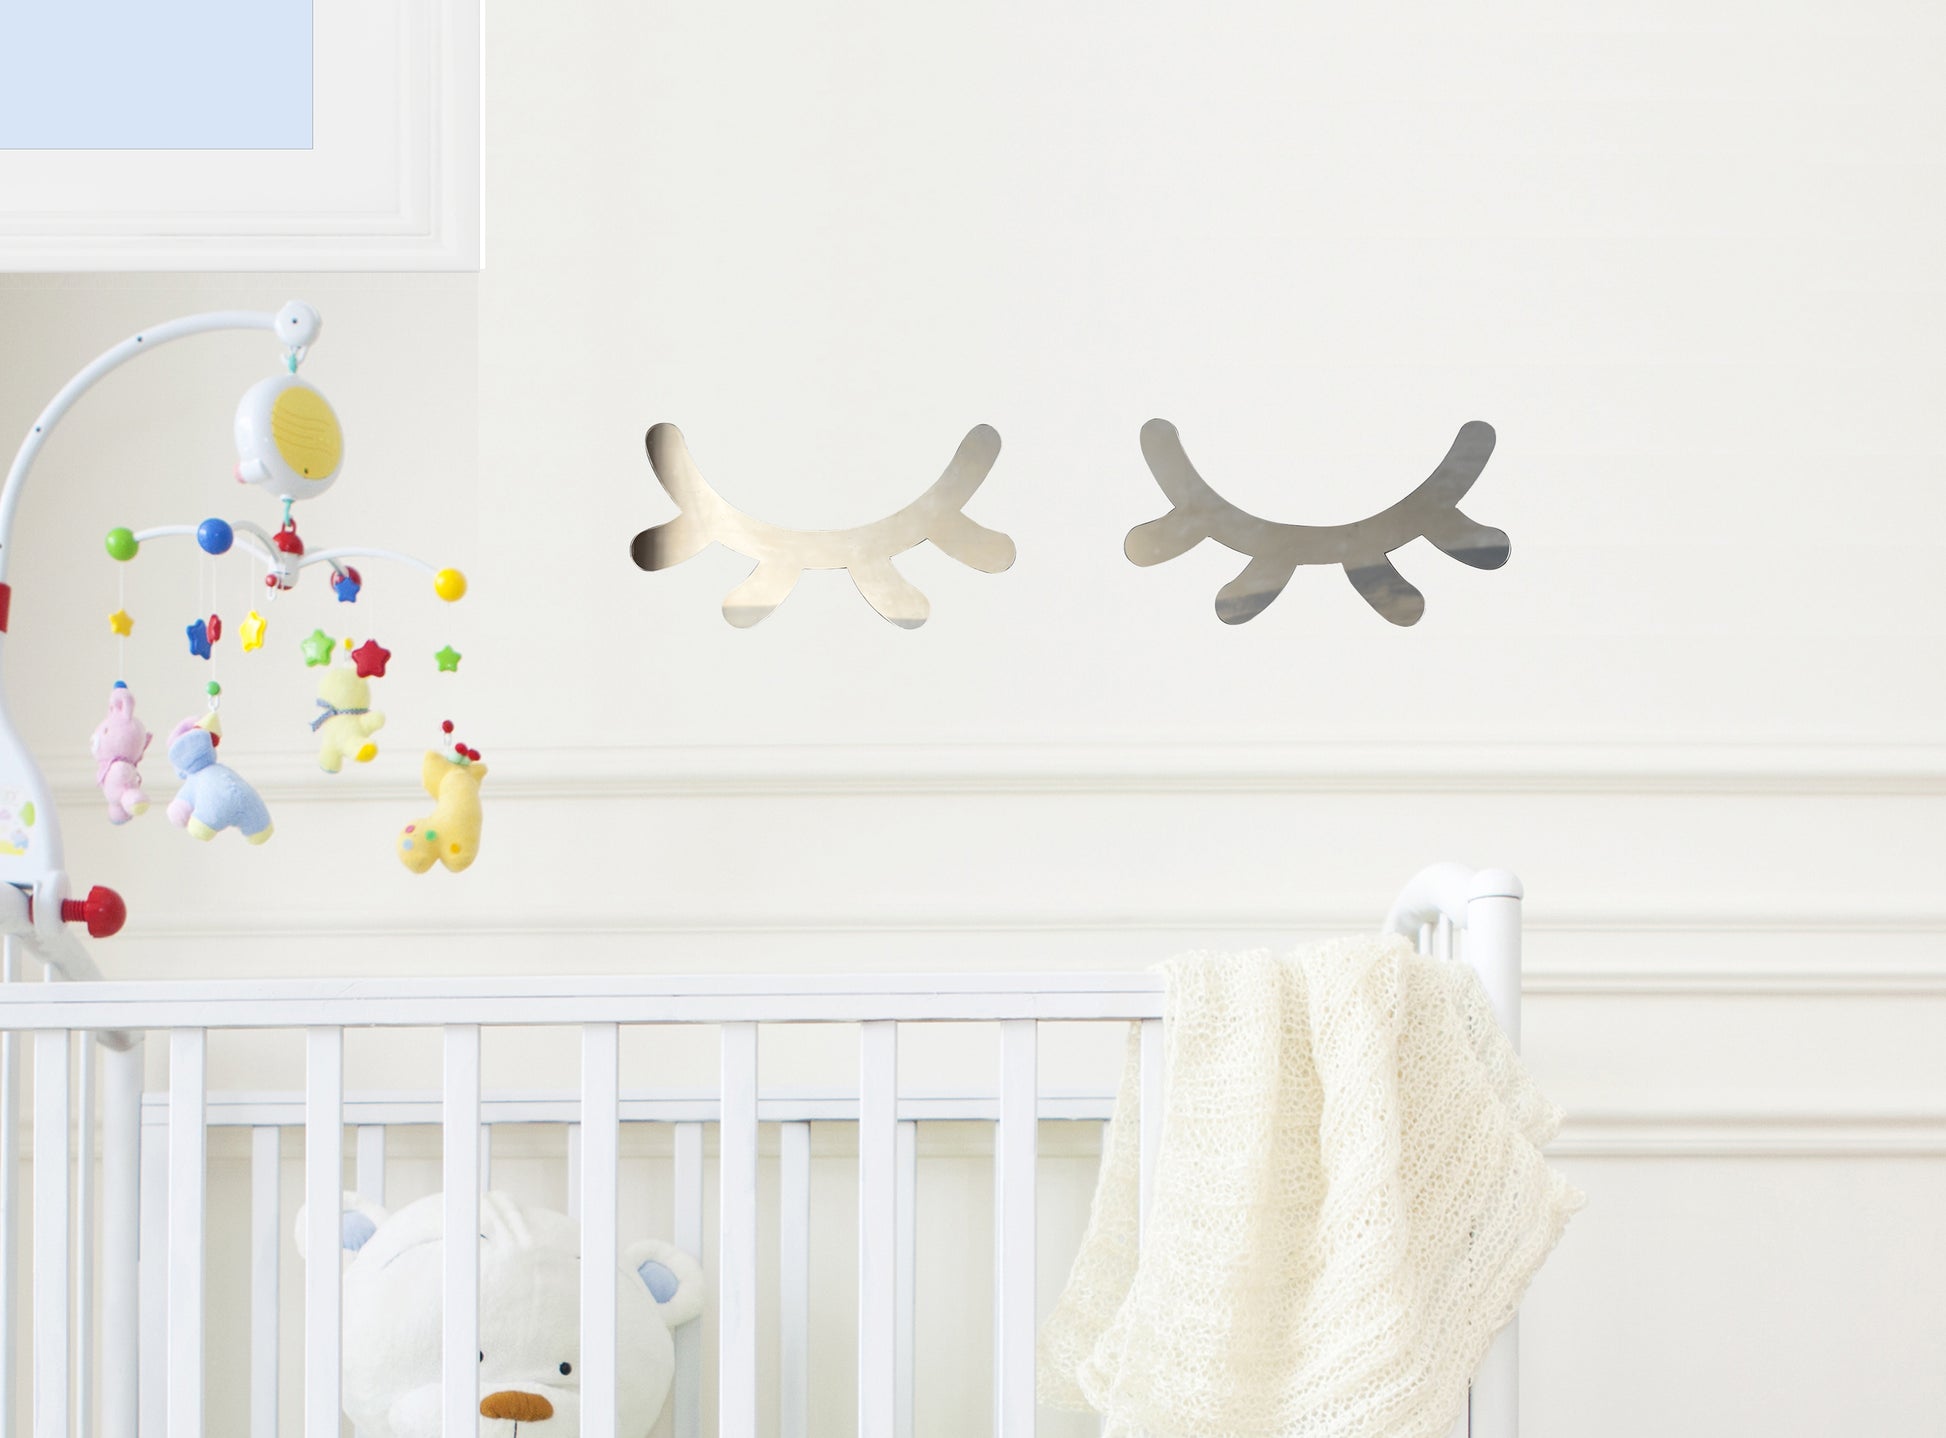 Sleepy Eye Mirrors for Baby or Child Room Decor - thebestcaketoppers